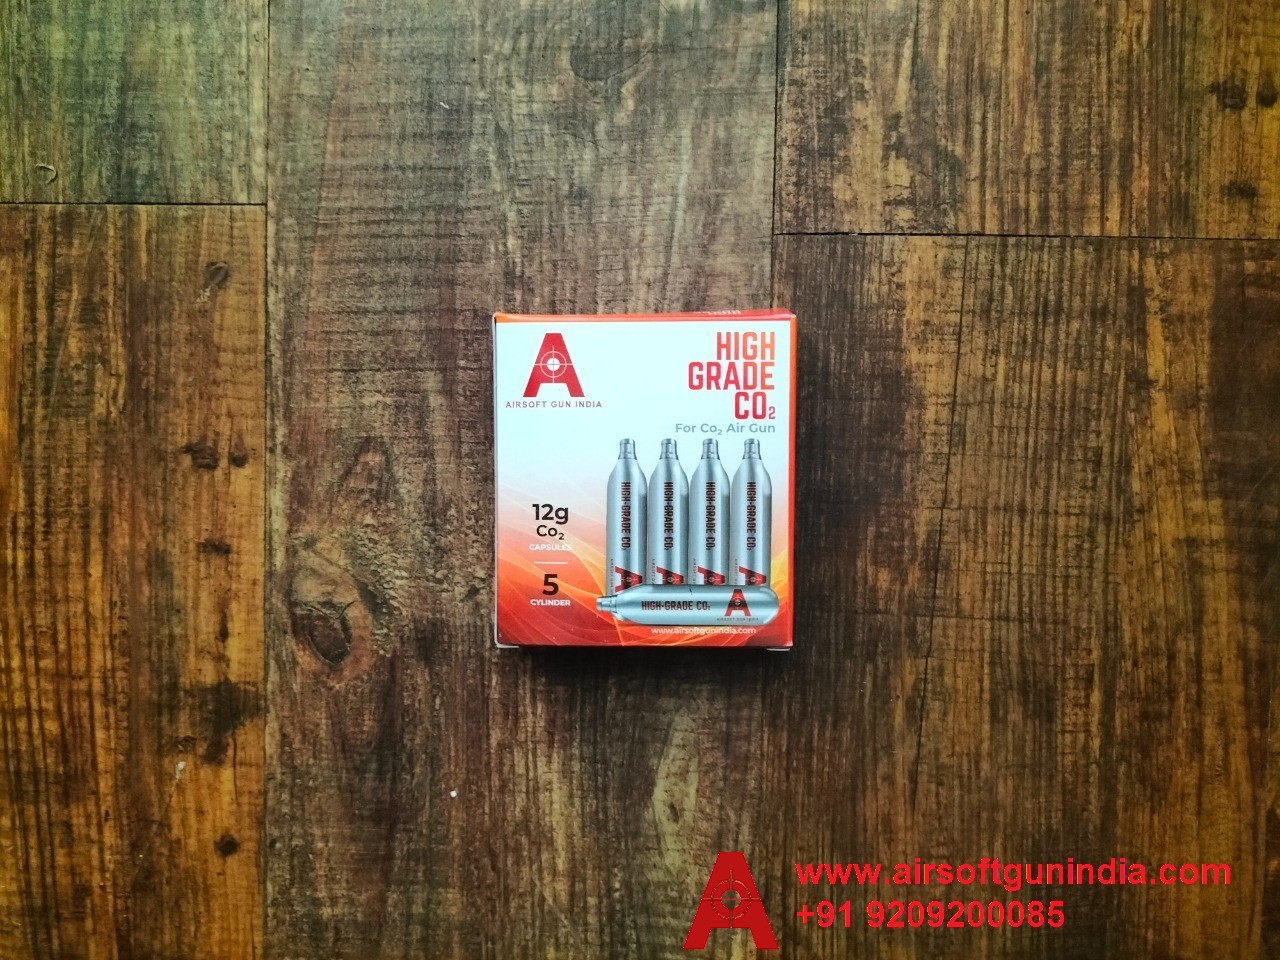 12 Gram Co2 Cartridges Pack Of 5 By Airsoft Gun India For Co2 Guns